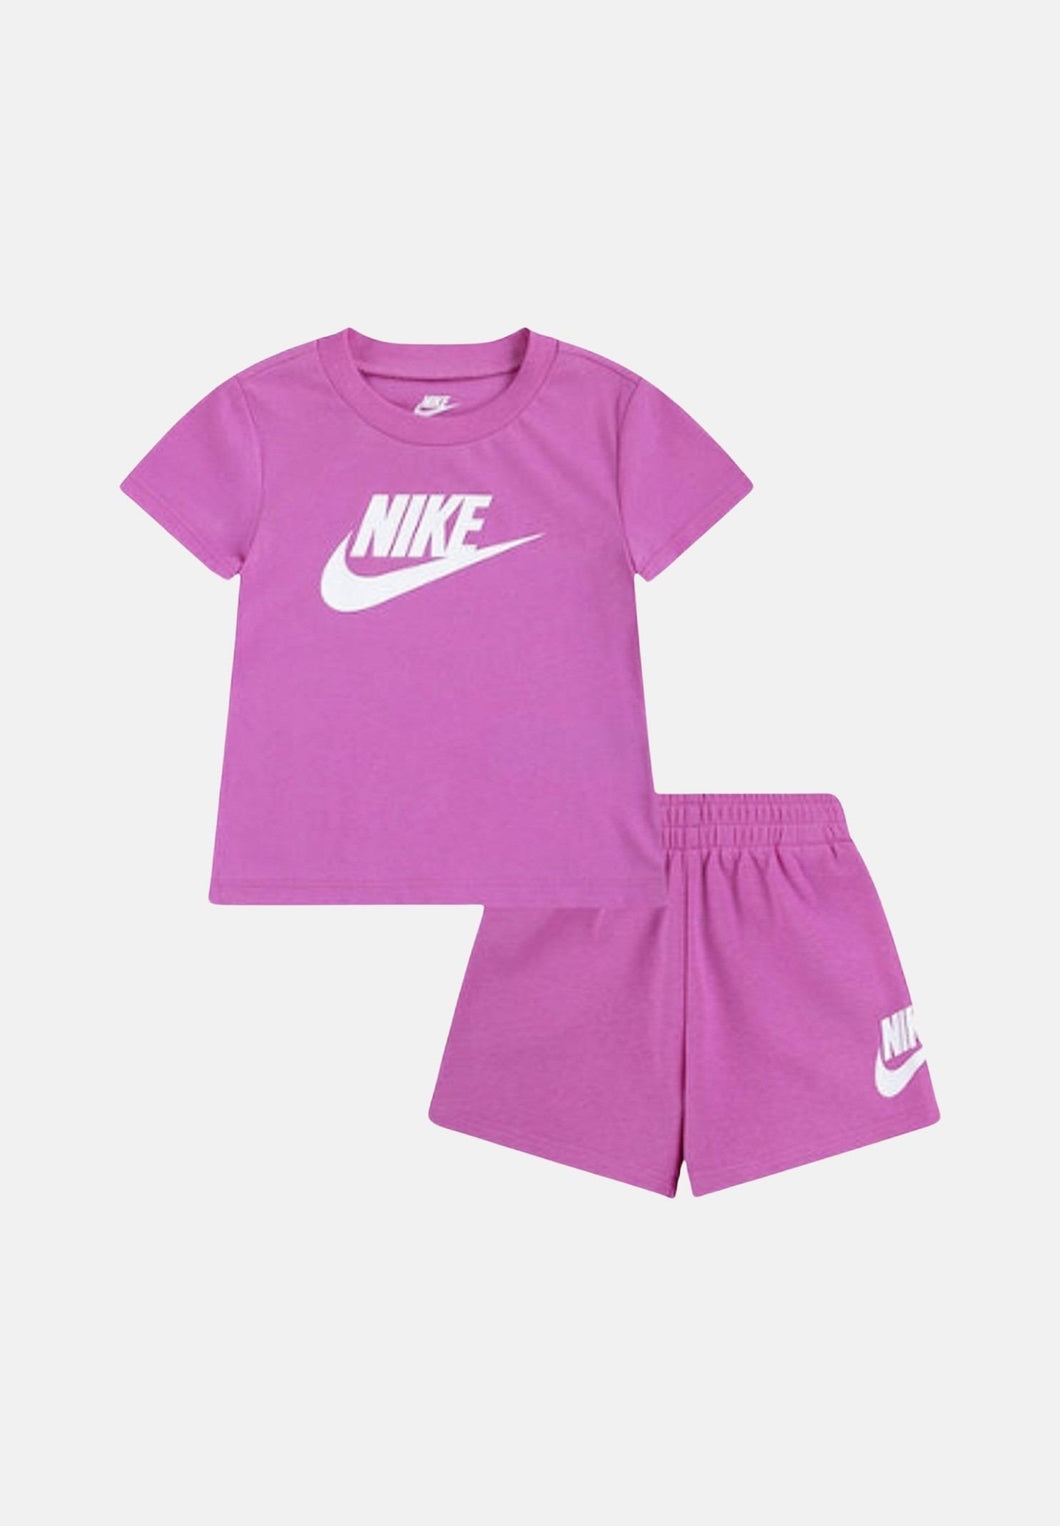 COMPLETINO T-SHIRT + SHORT INFANT